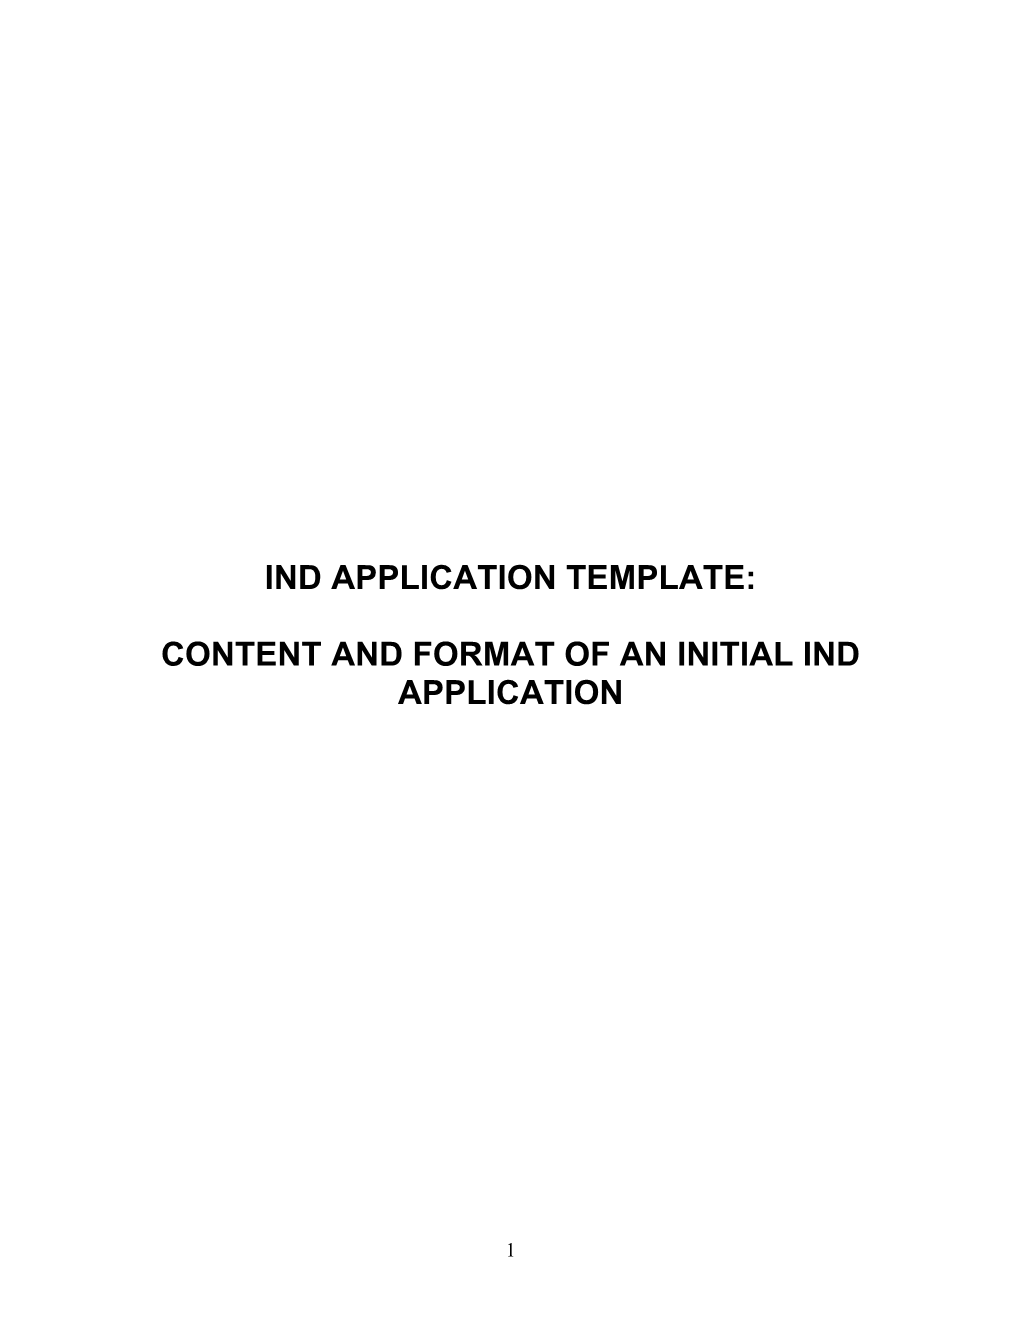 IND Application Template